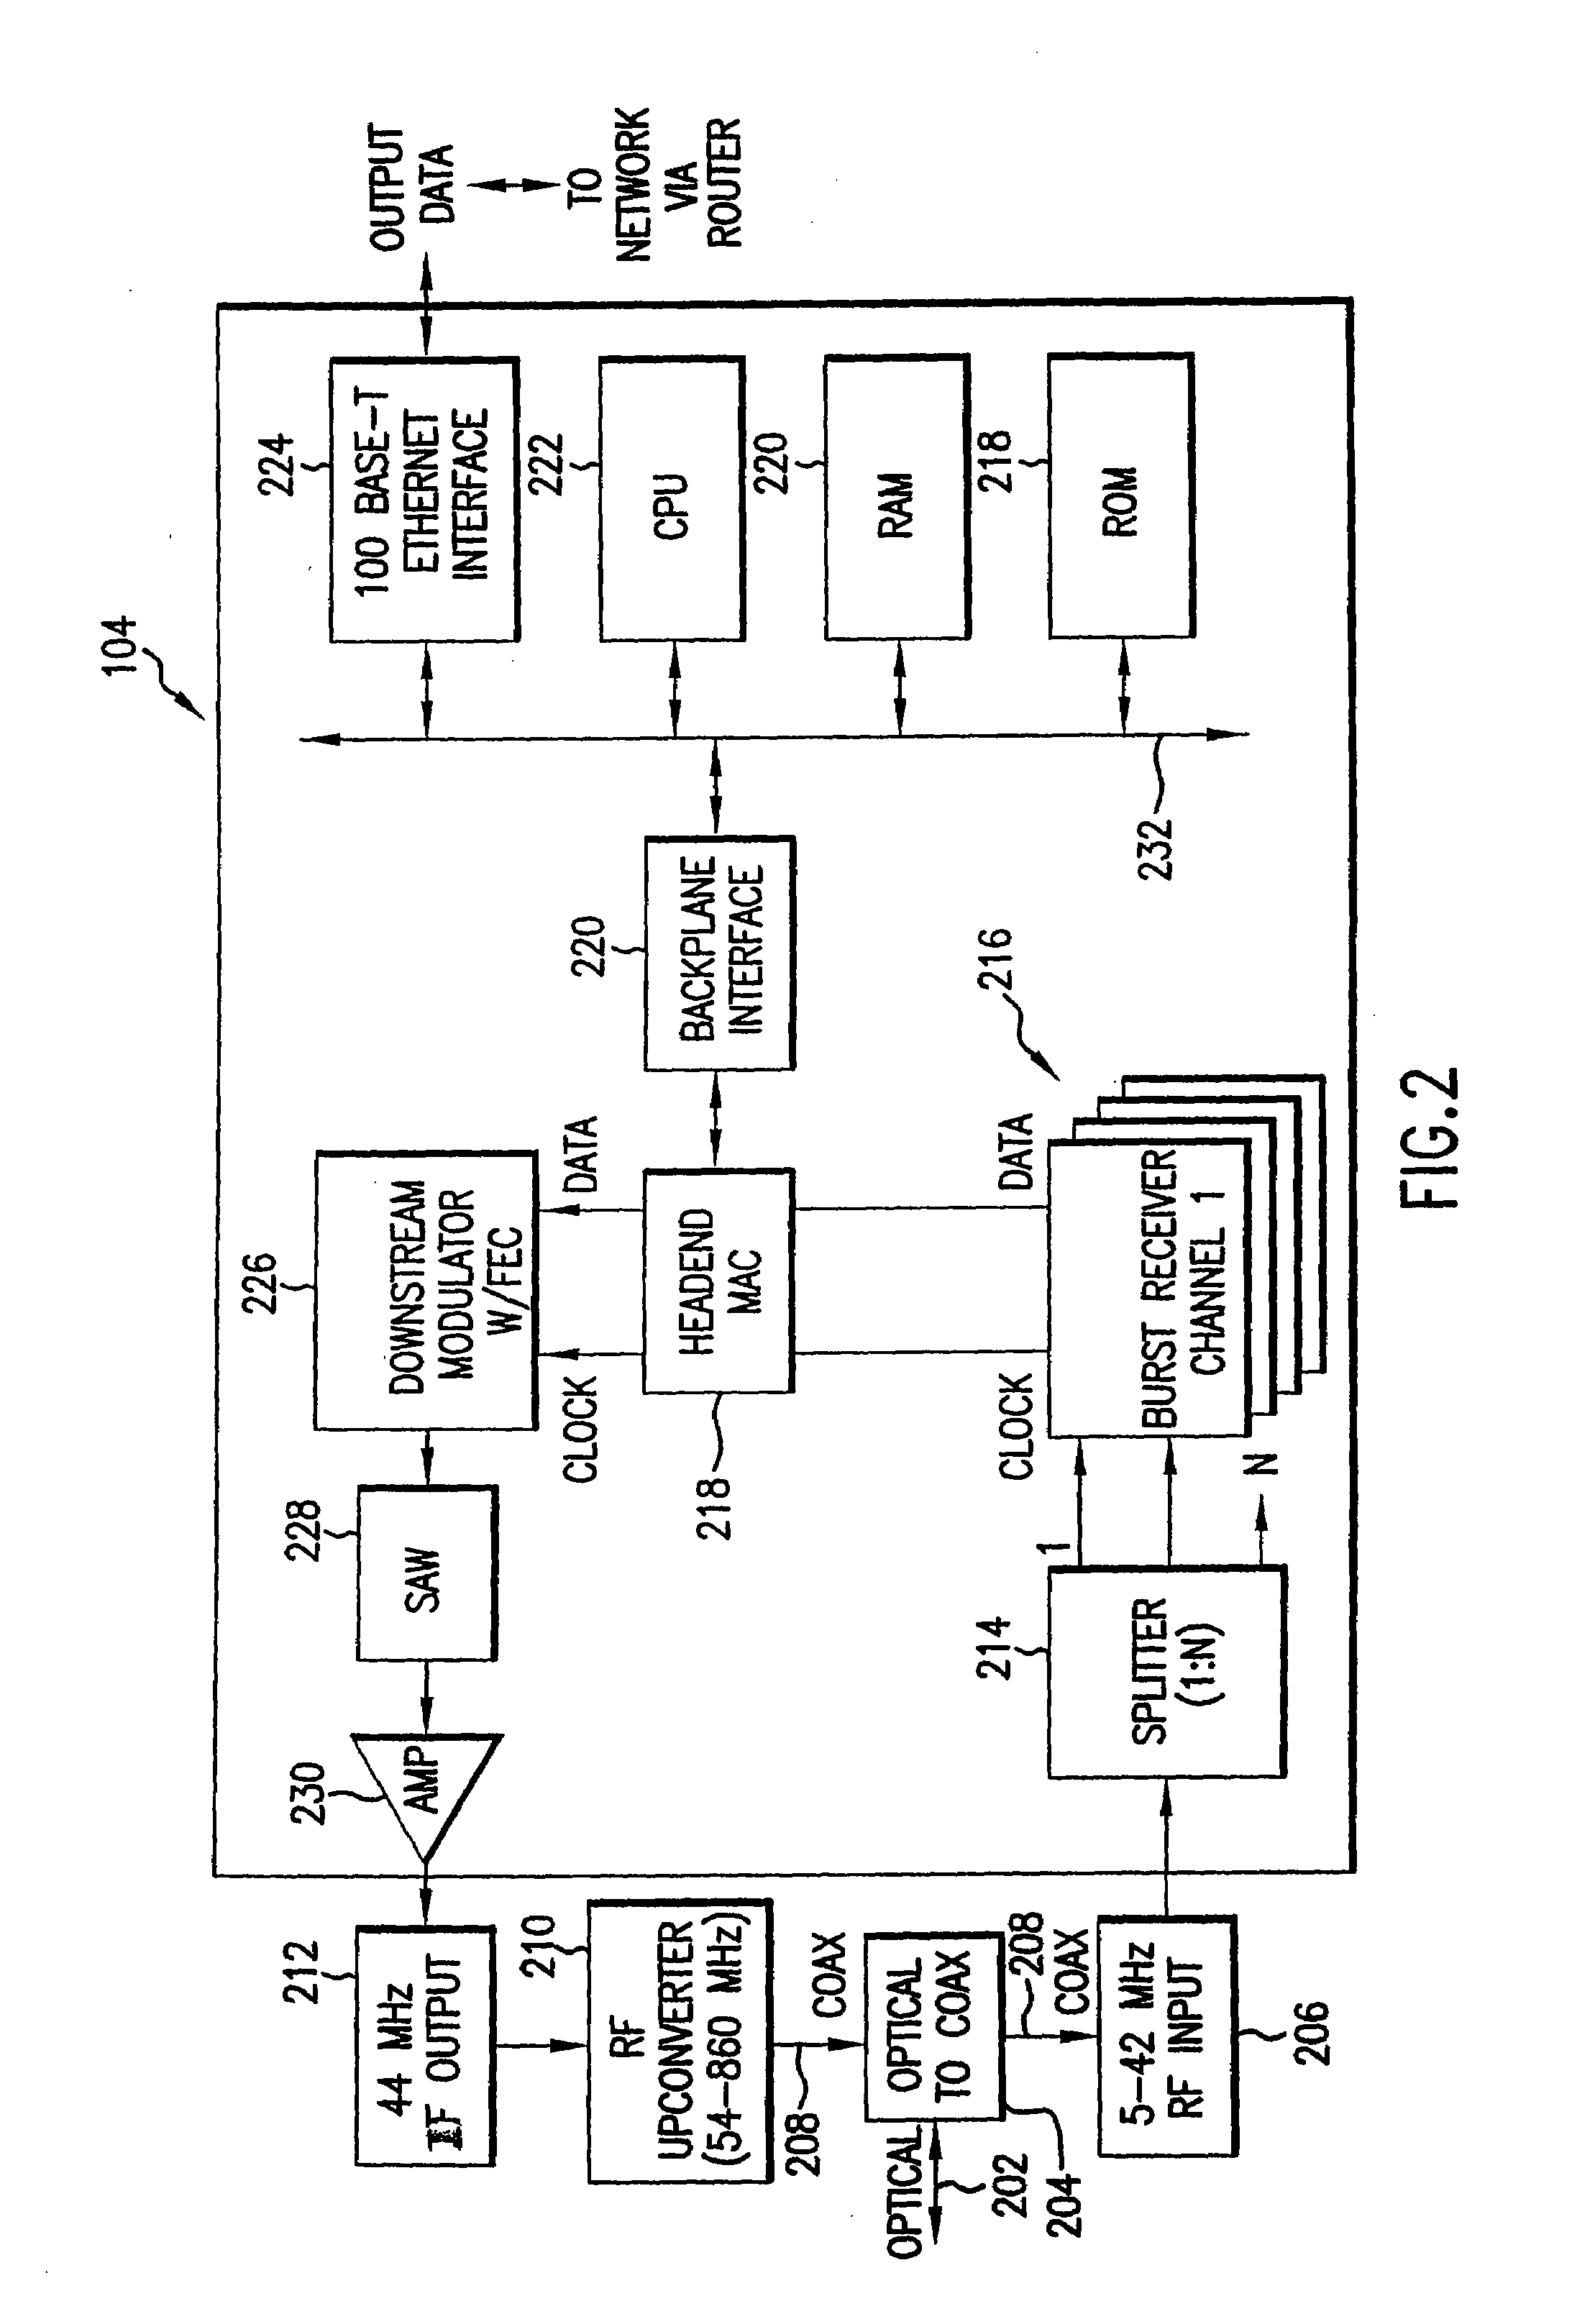 System and Method For Mitigating Burst Noise In A Communications System